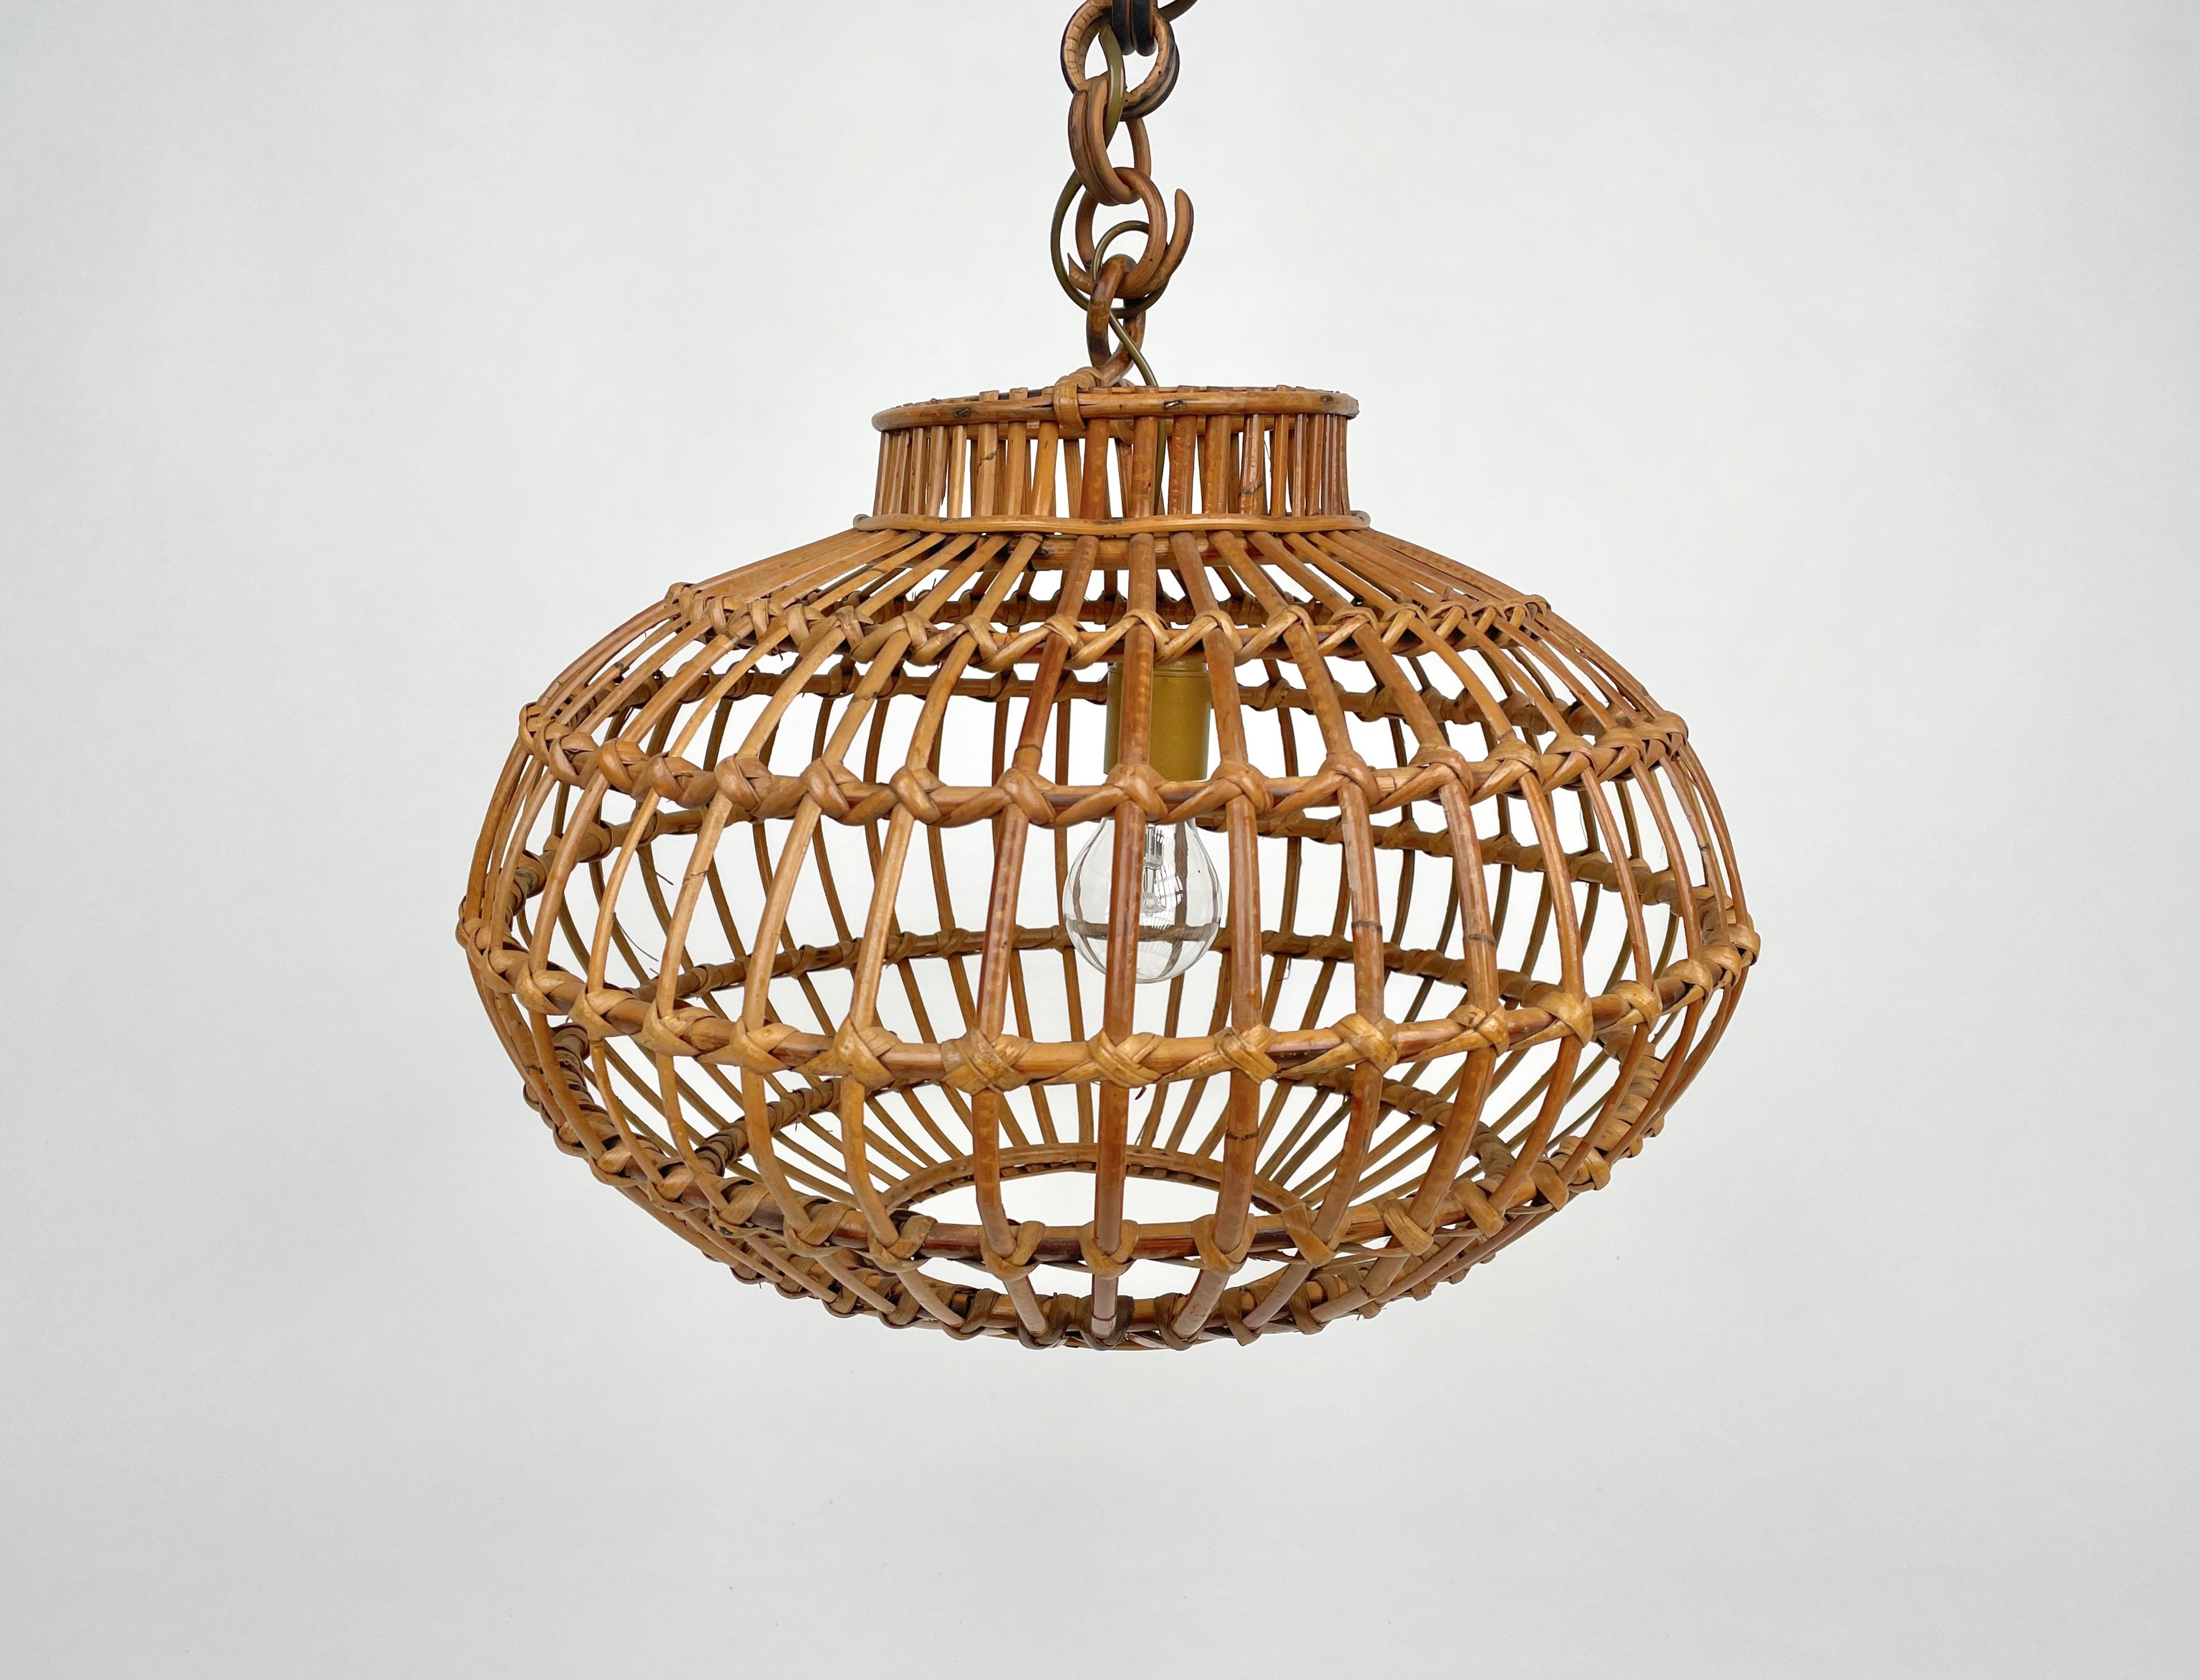 Italy Modern rattan lantern with globe or ball shaped lampshade. Made in Italy in the 1960s.
This suspension lamp is entirely handcrafted with rattan. The ball shaped shade hangs from a chain with round rattan links which can be shortened to adjust